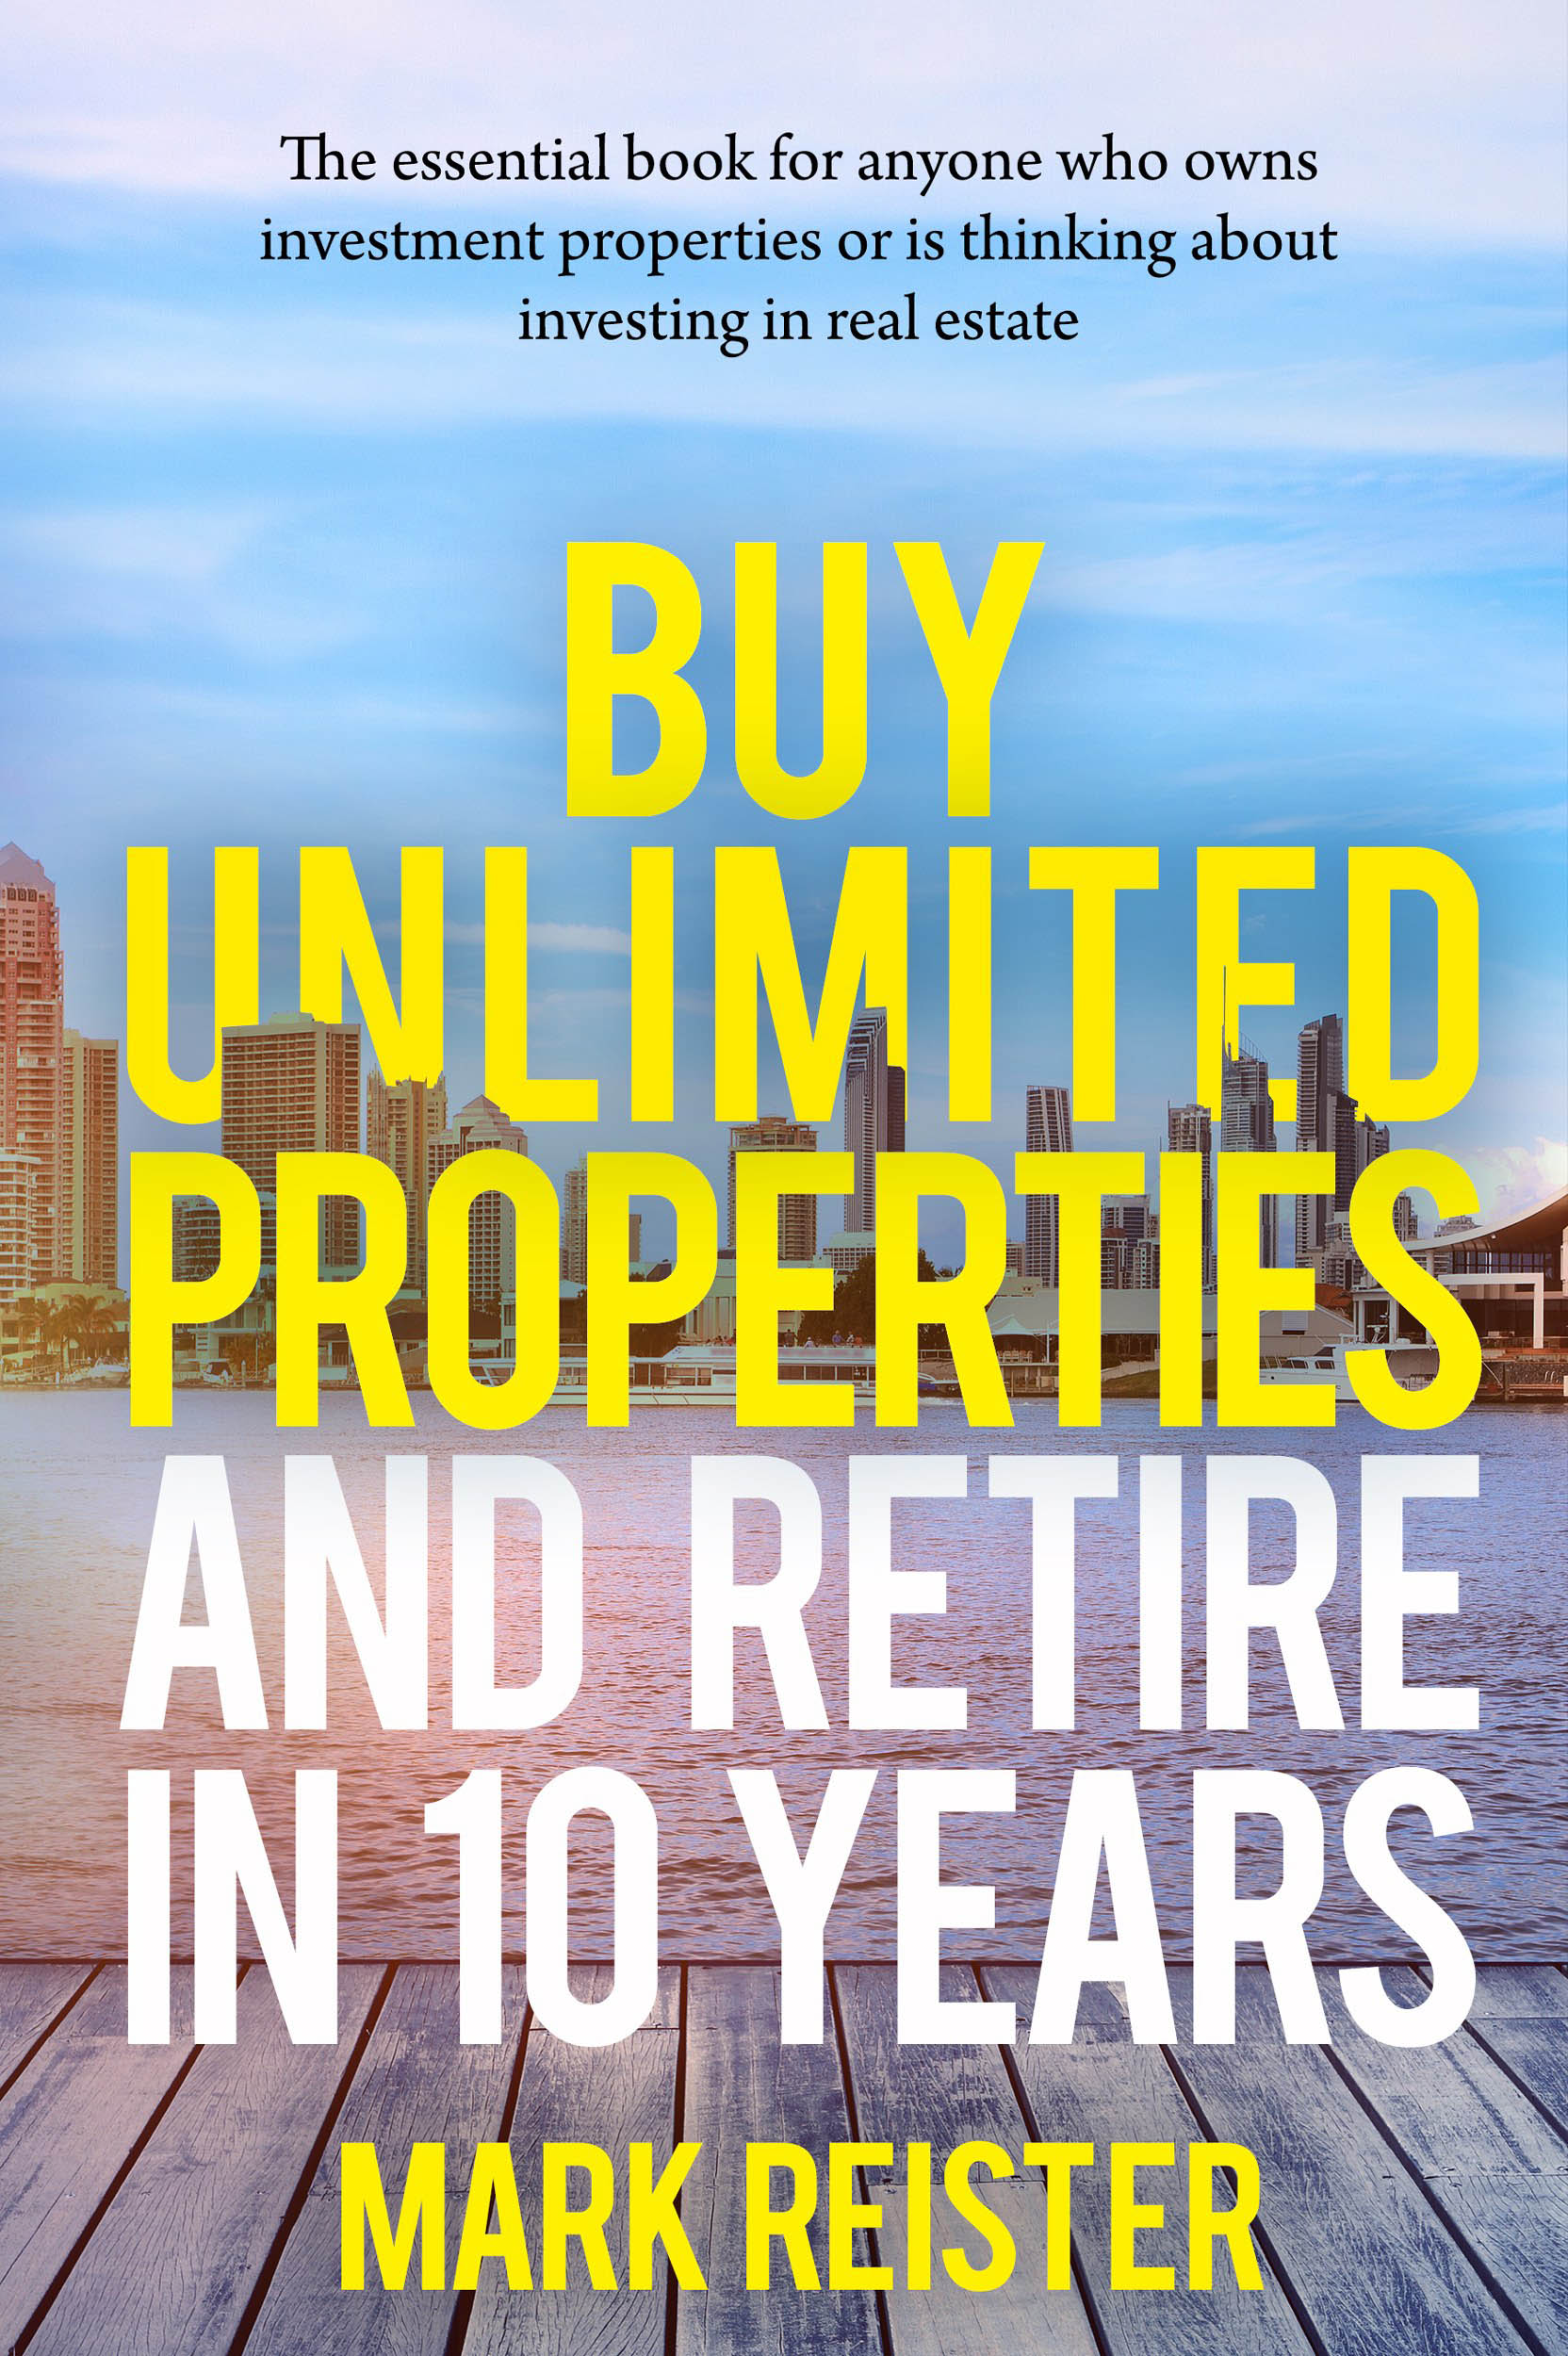 owning investment property in retirement